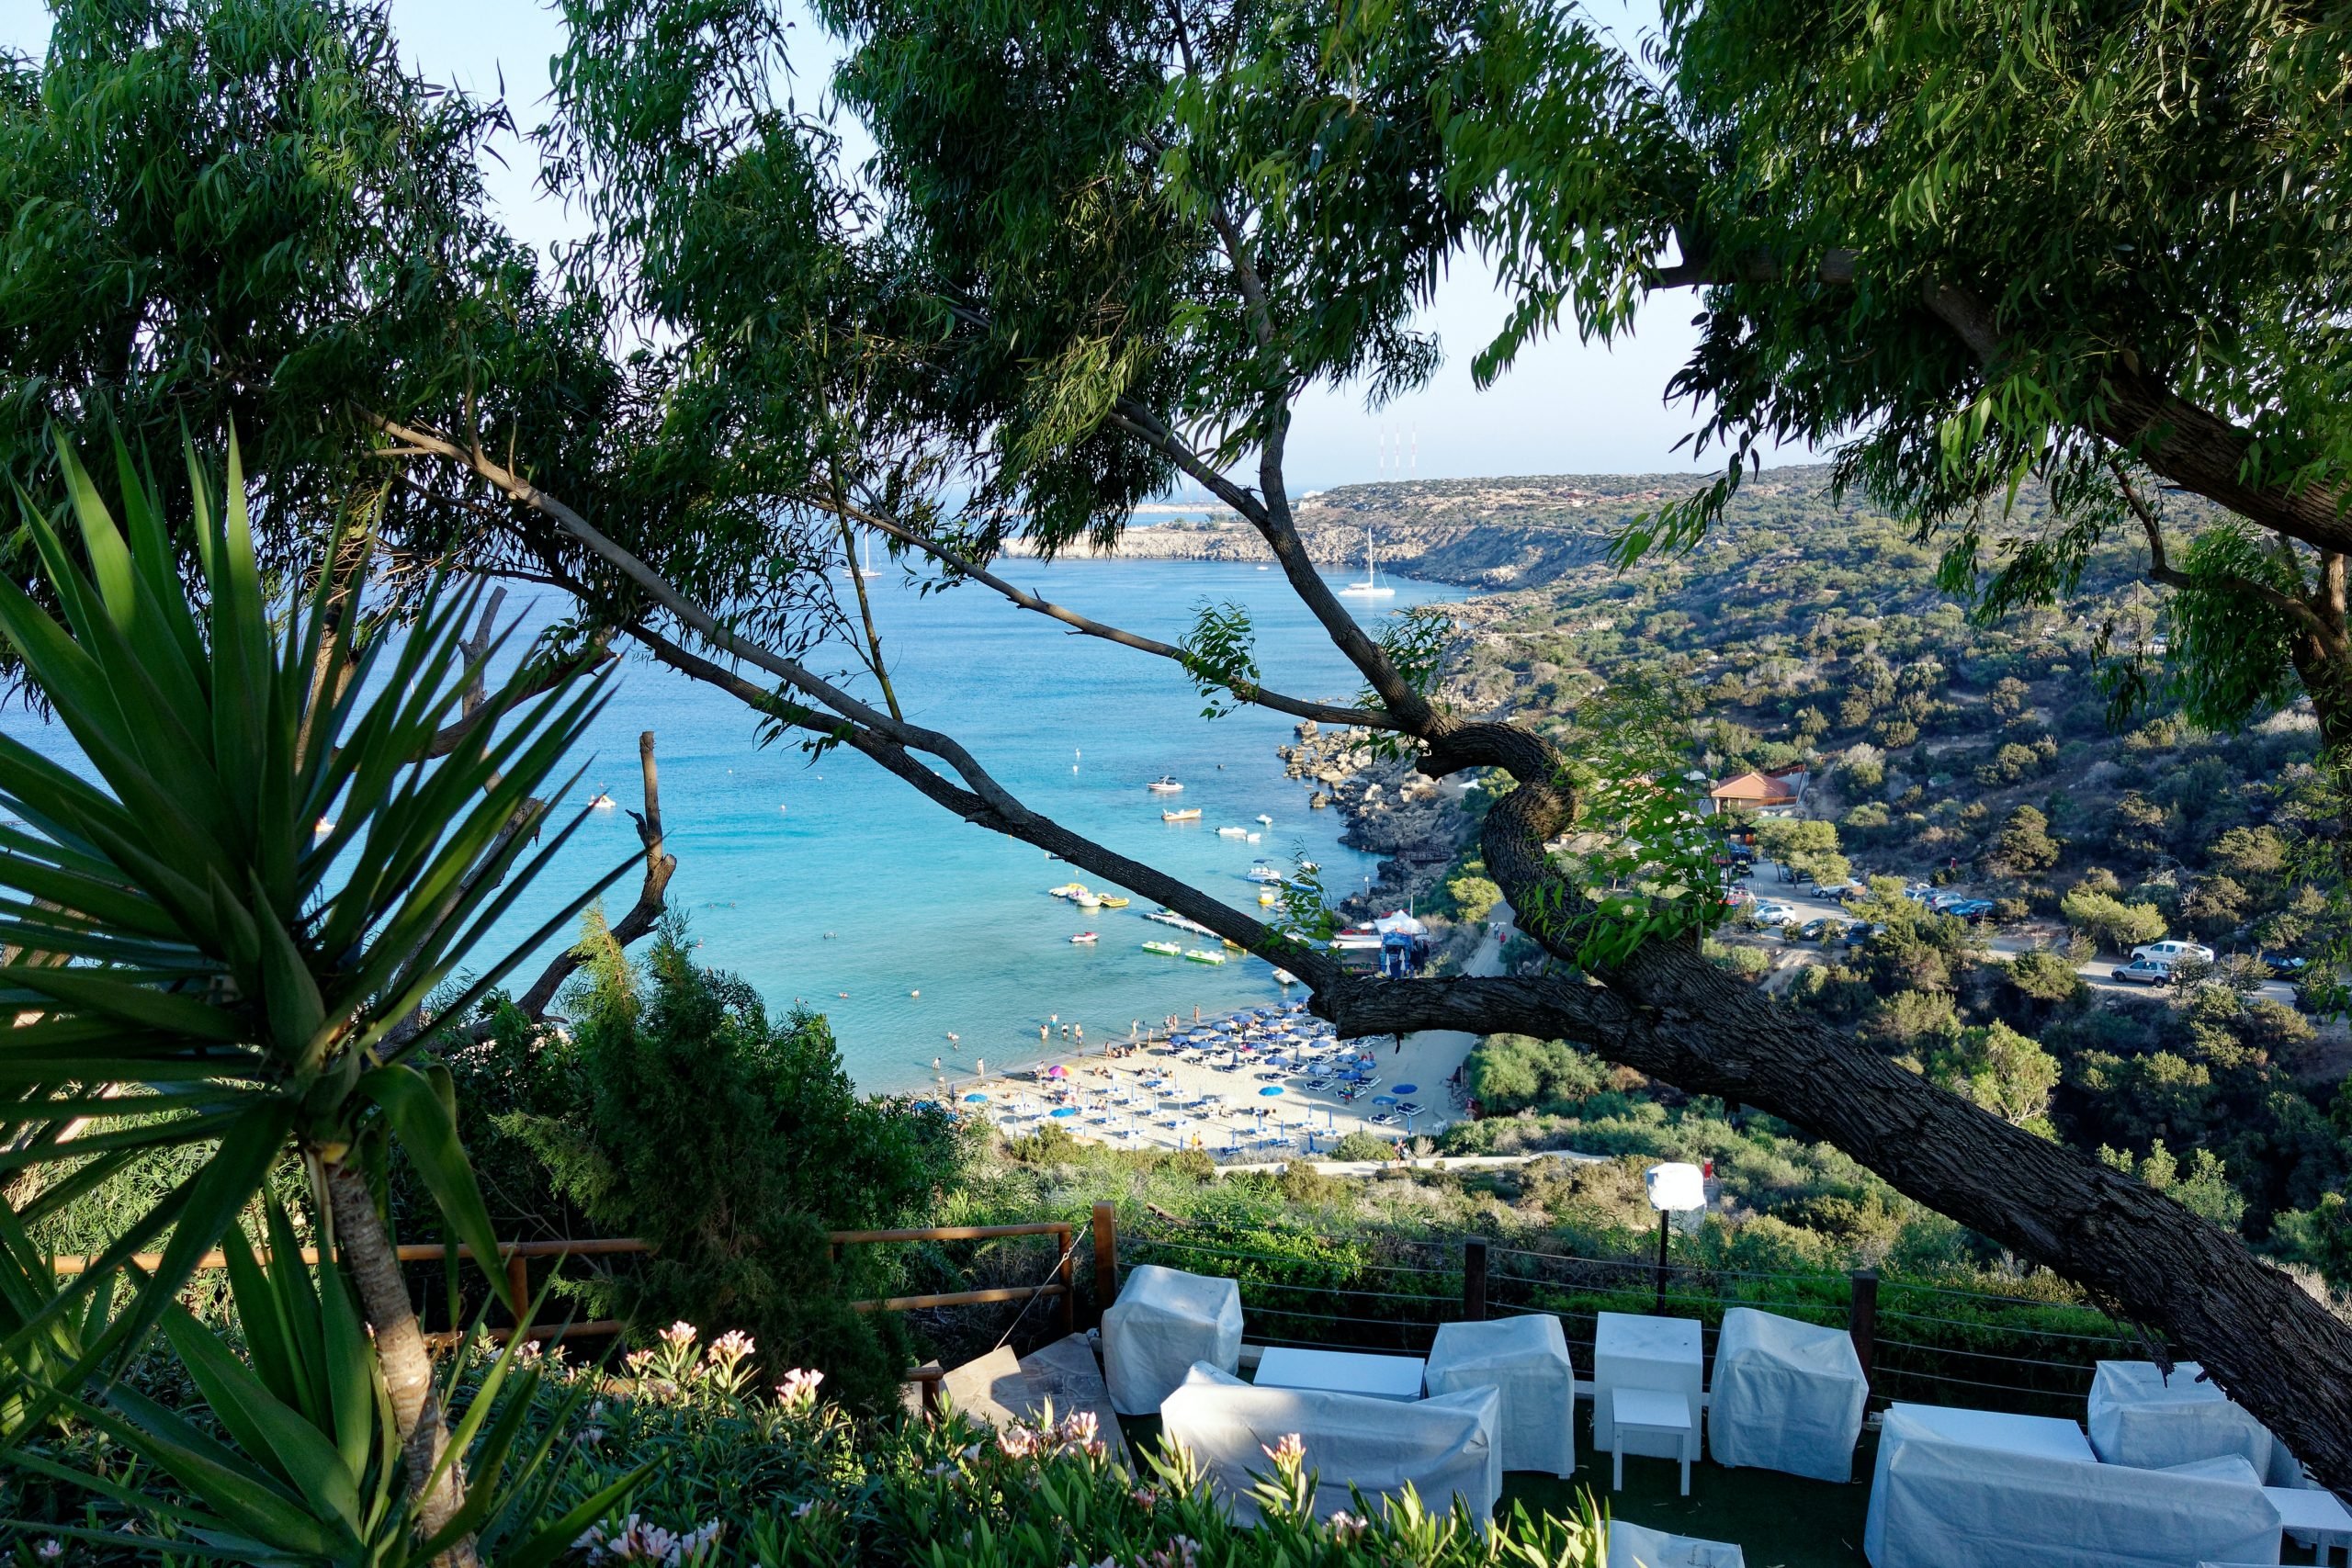 Konnos Bay, Most Instagrammable Places In Cyprus And Best Cyprus Instagram Spots